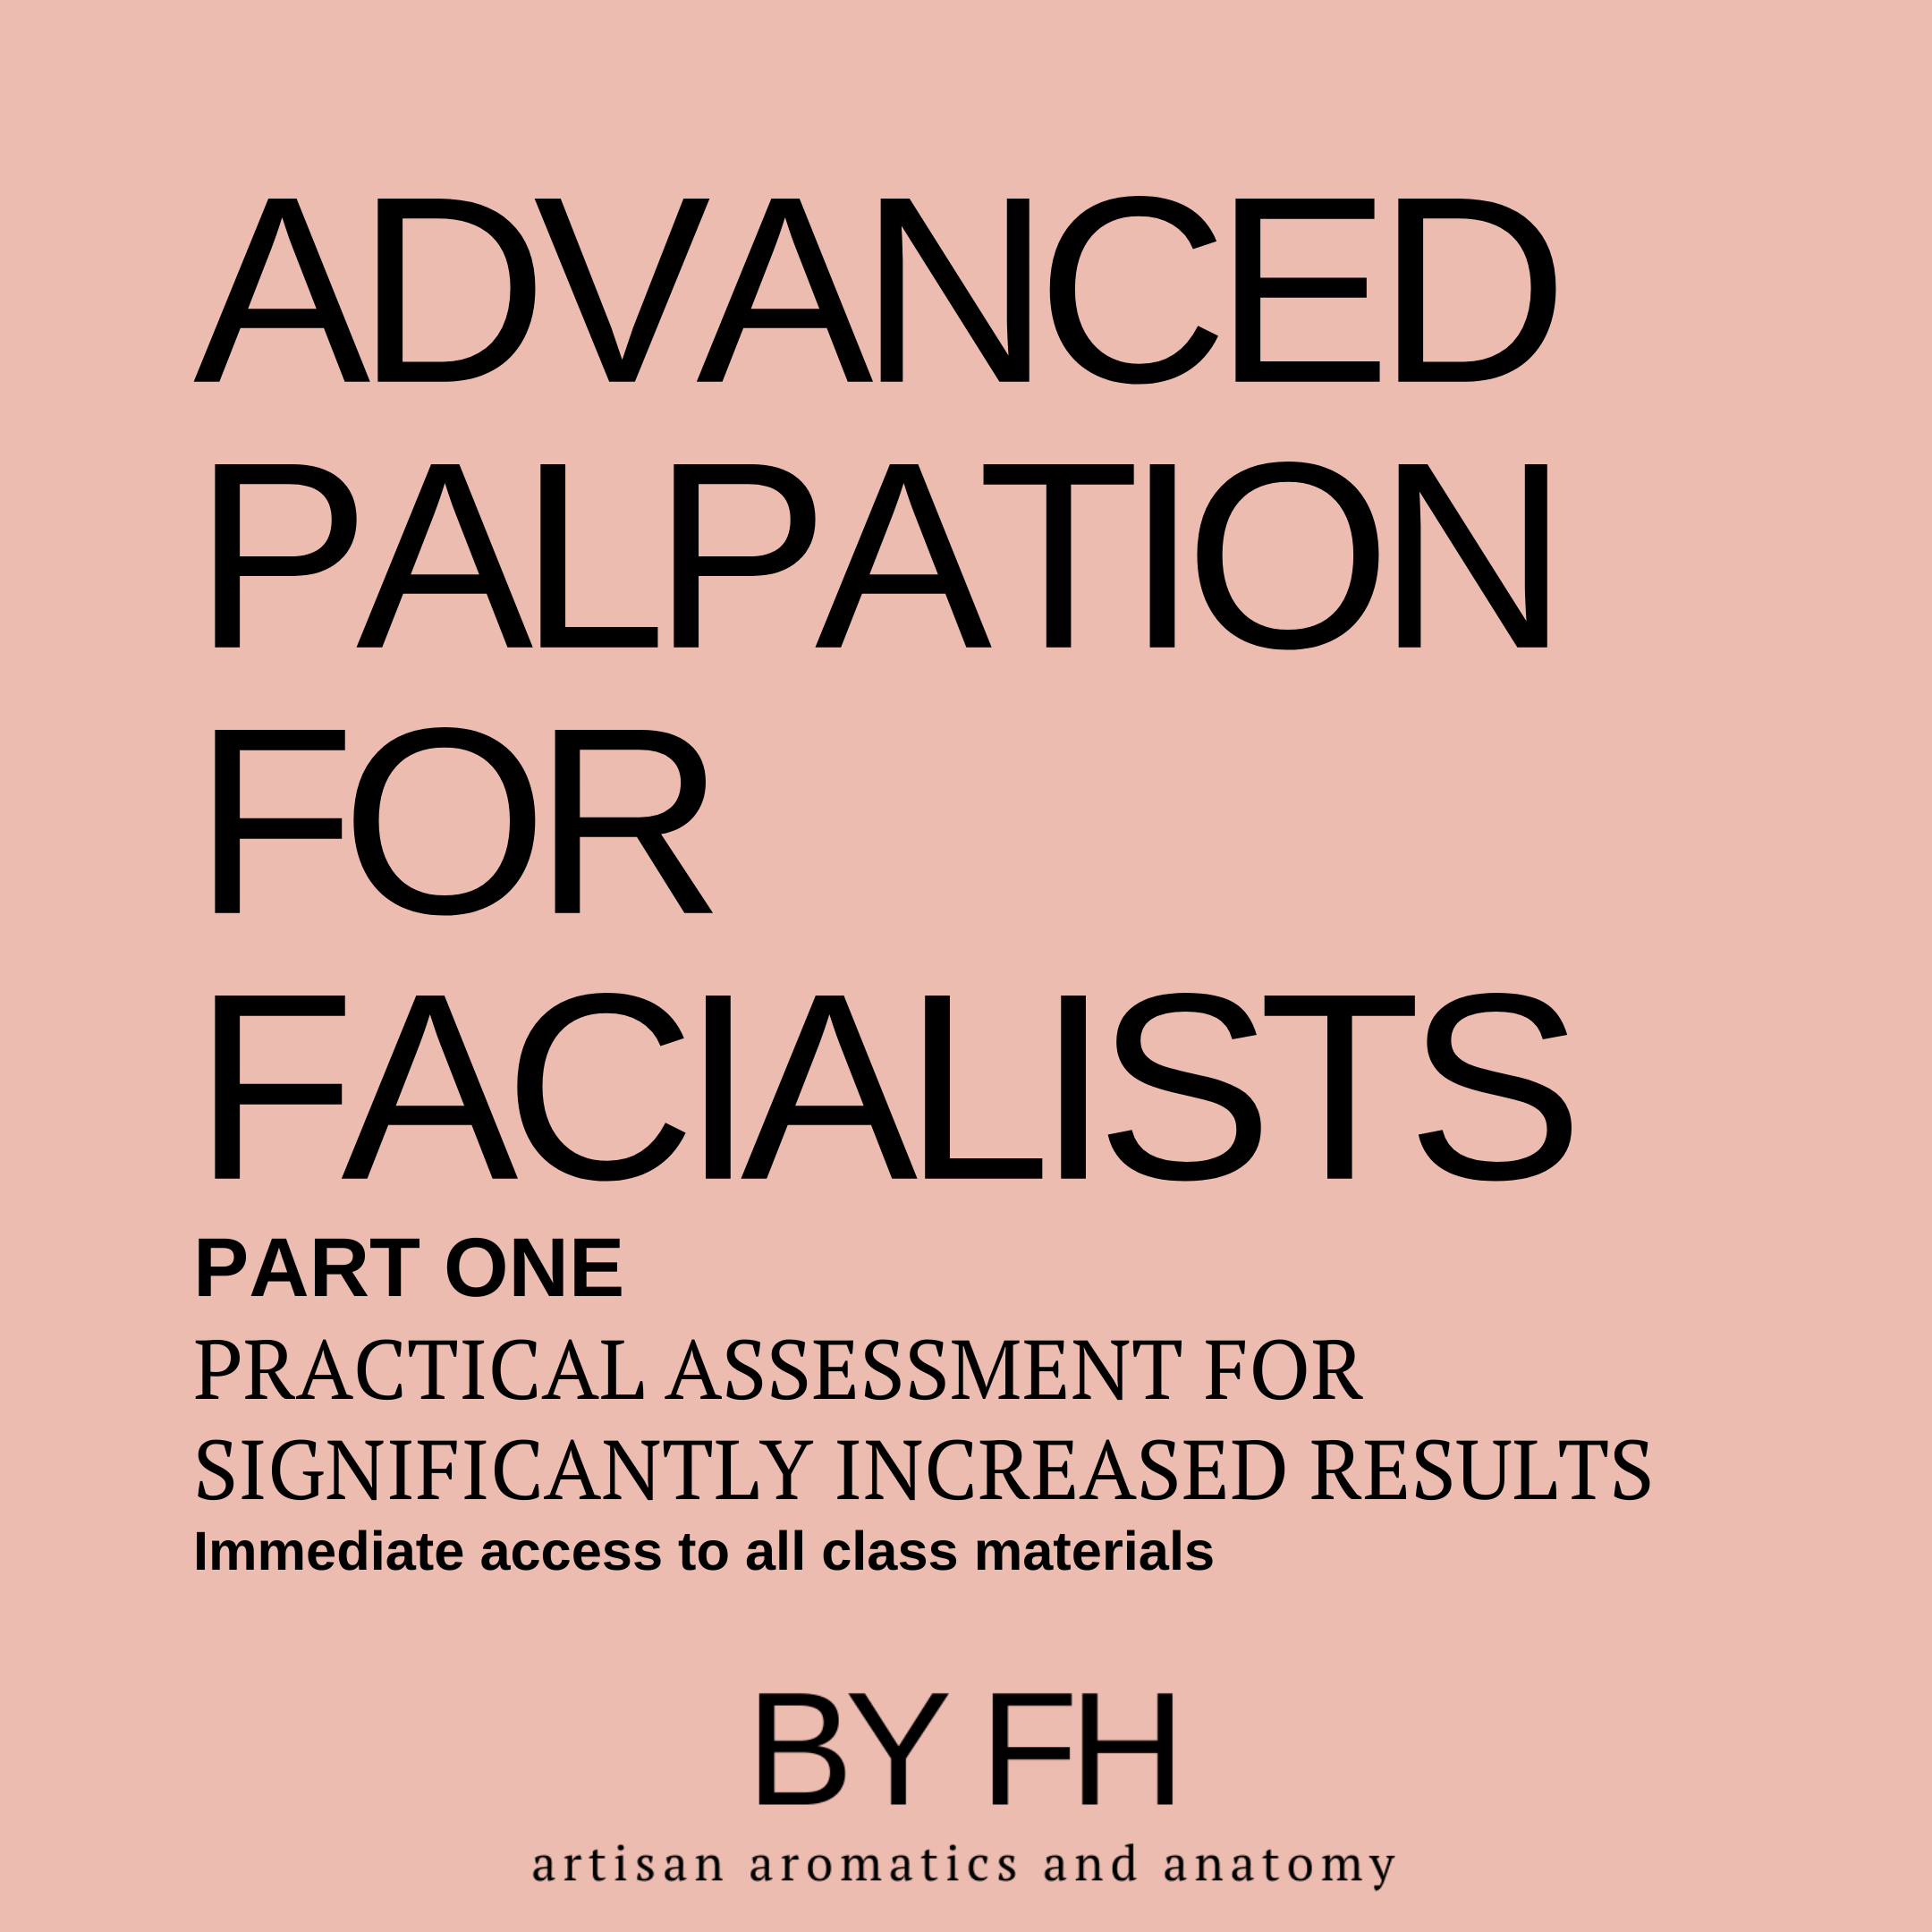 Advanced Palpation for Facialists NO DATE.png